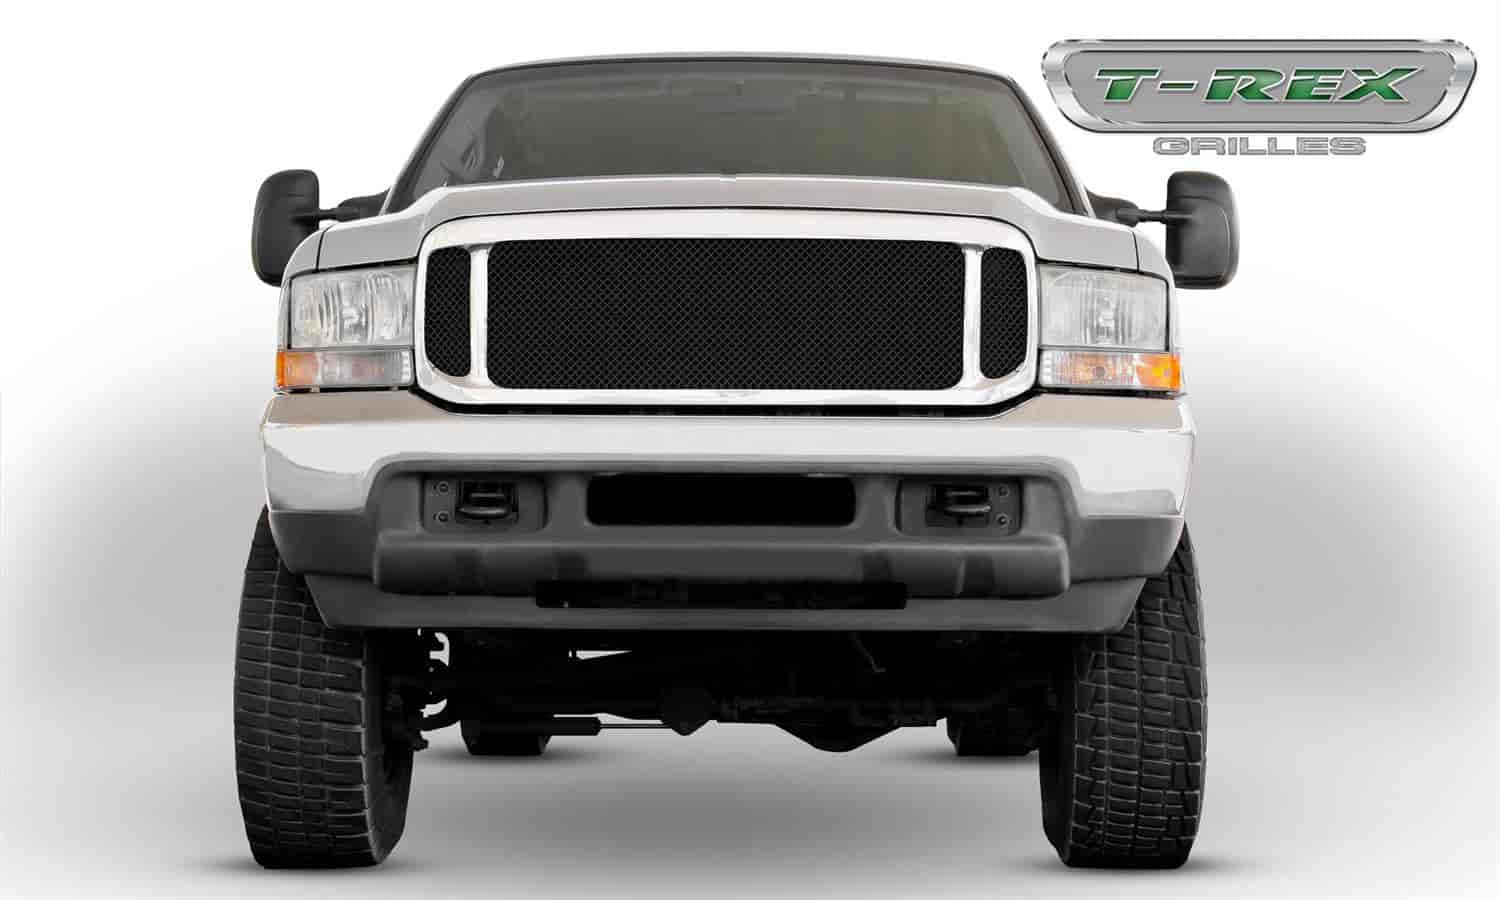 Upper Class Mesh Grille Assembly 1999-2004 Ford F-250/F-350 SD Fits FX4 and XLT